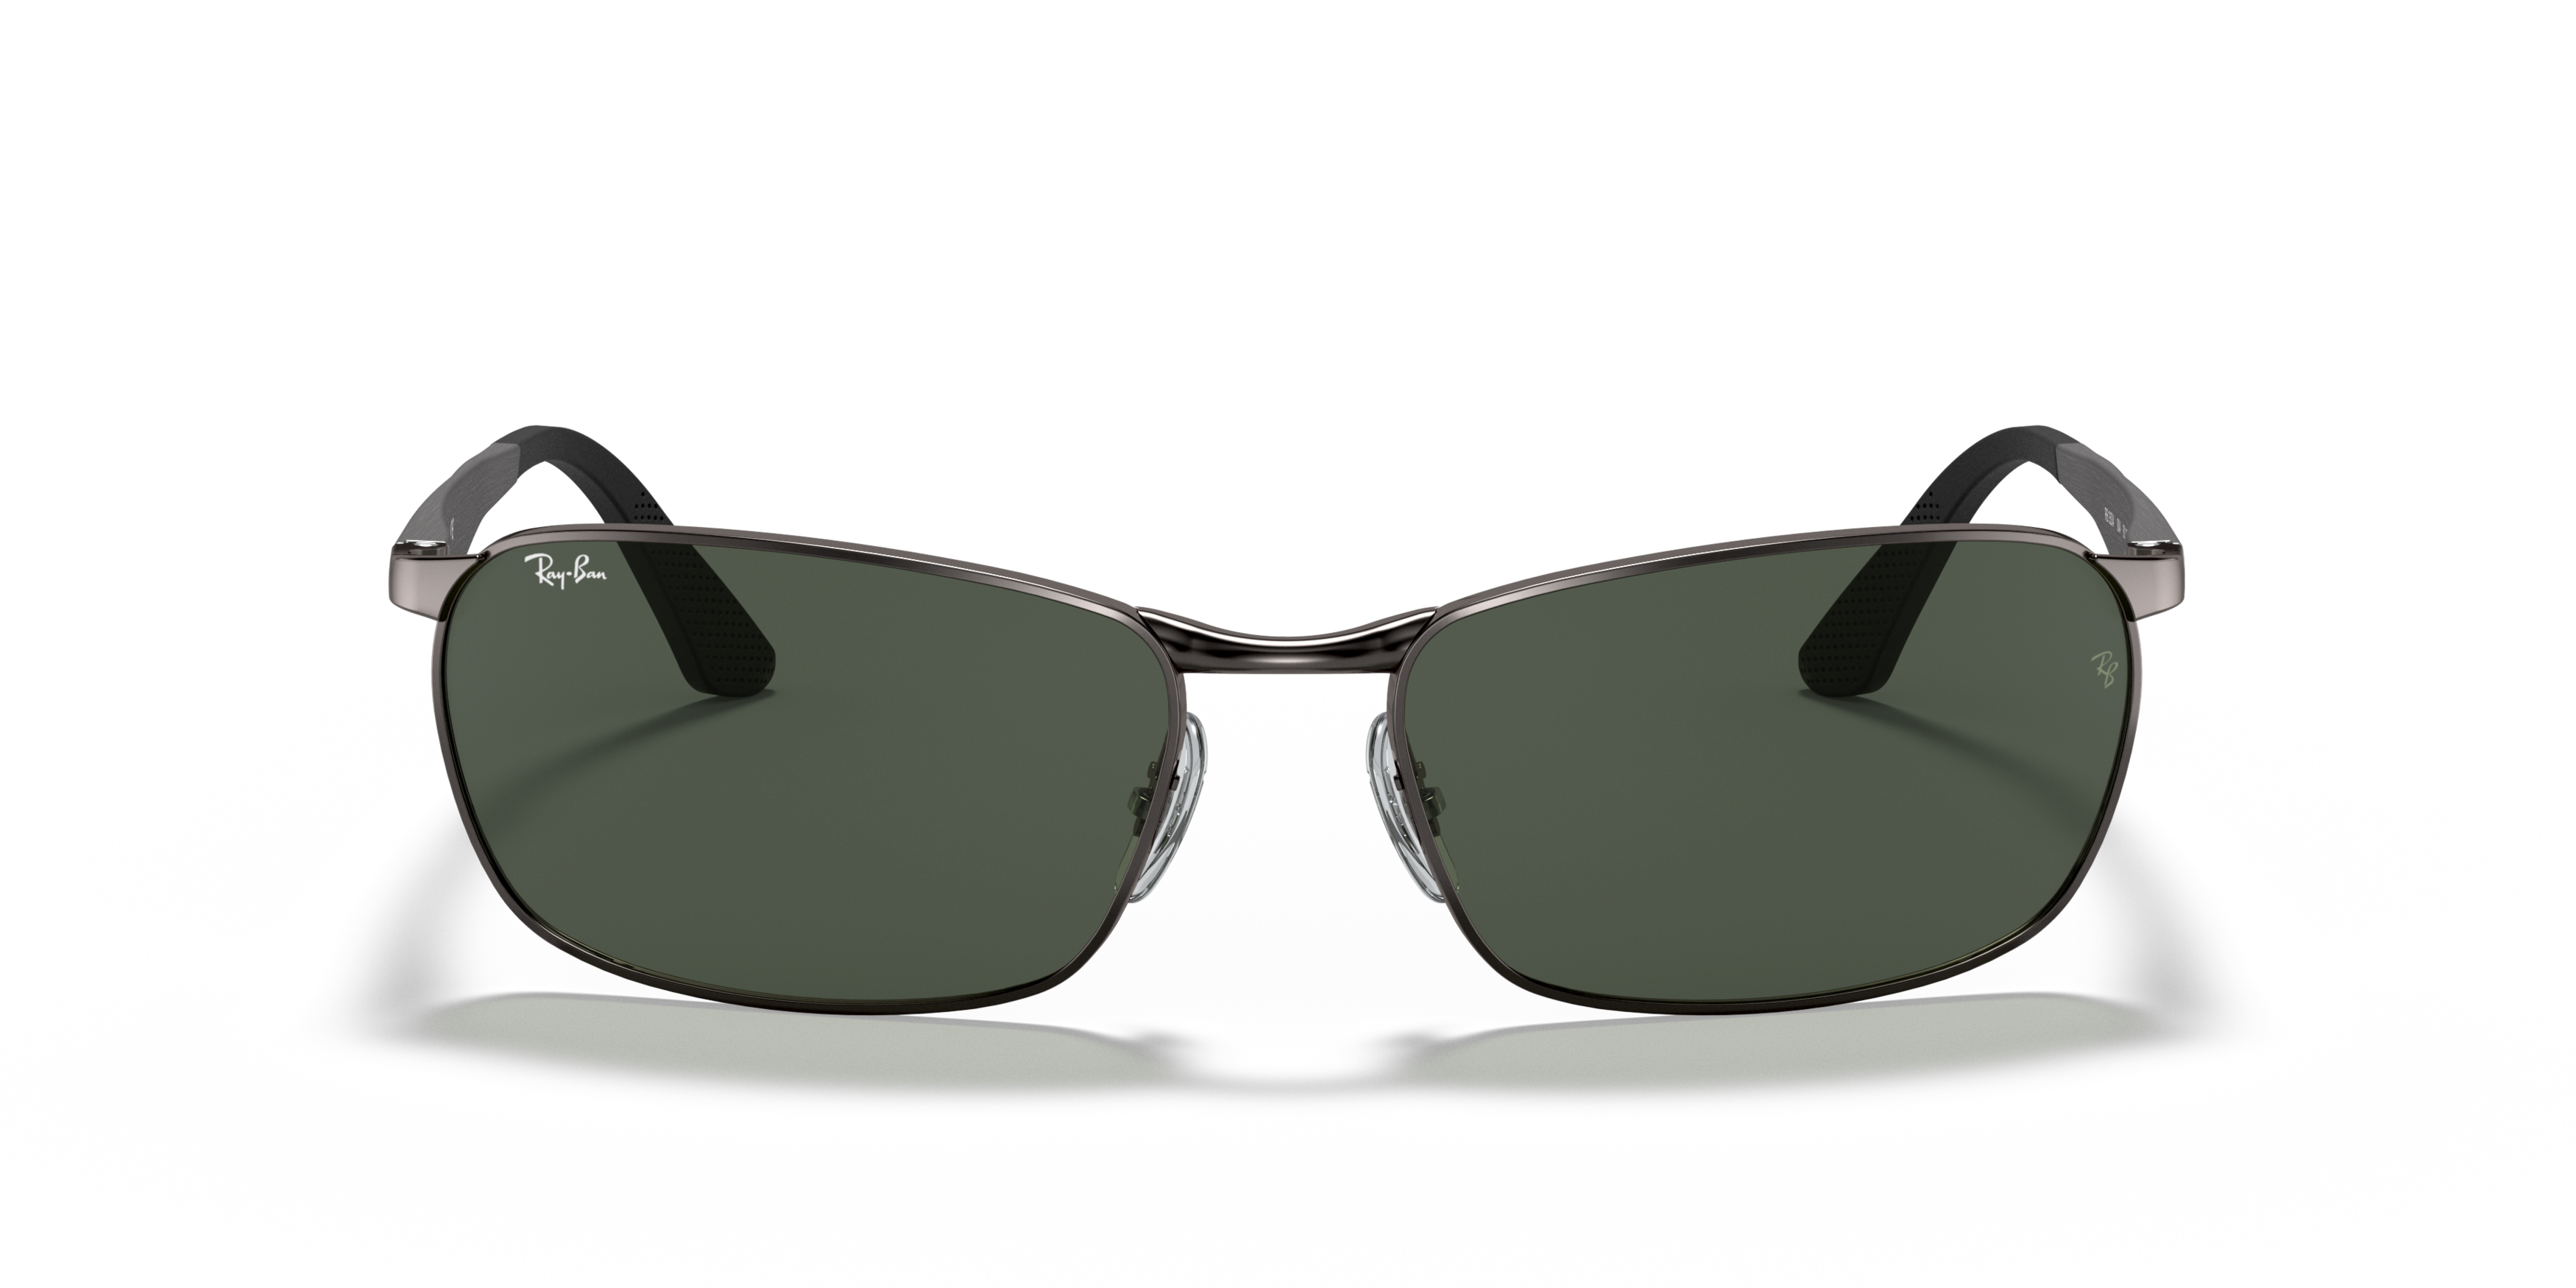 [products.image.front] Ray-Ban 3534 4